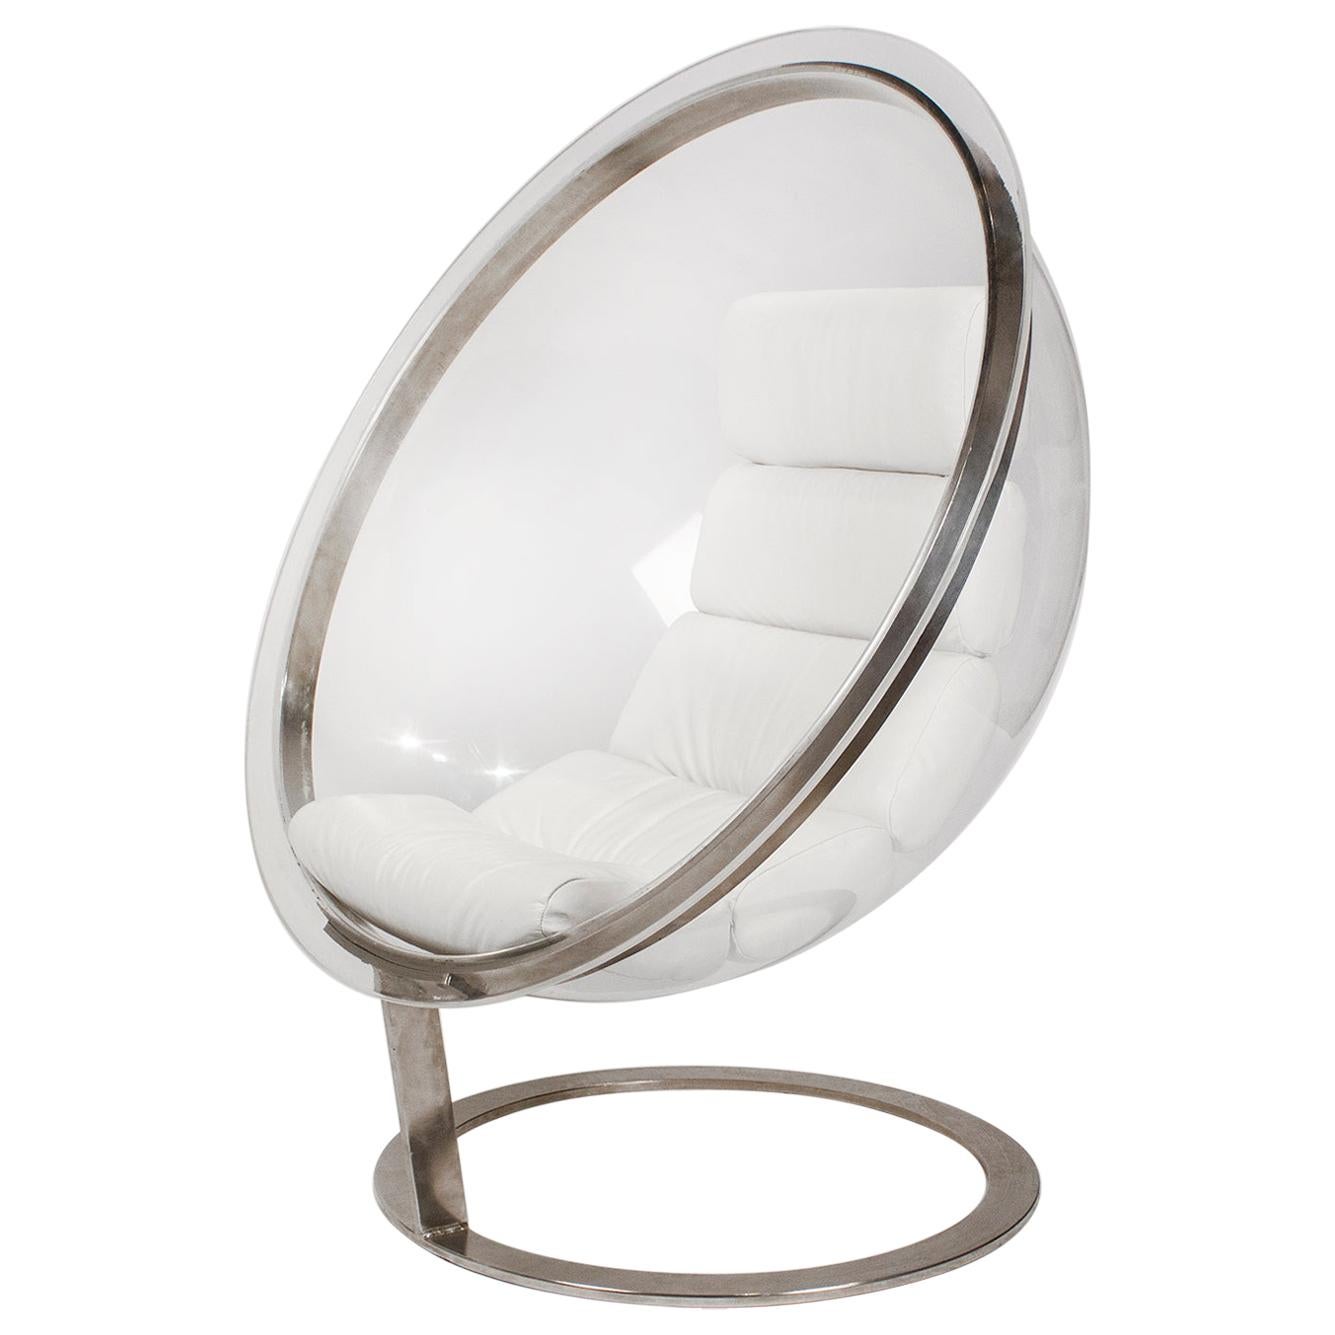 Acrylic Bubble Chair by Christian Daninos, First Edition 